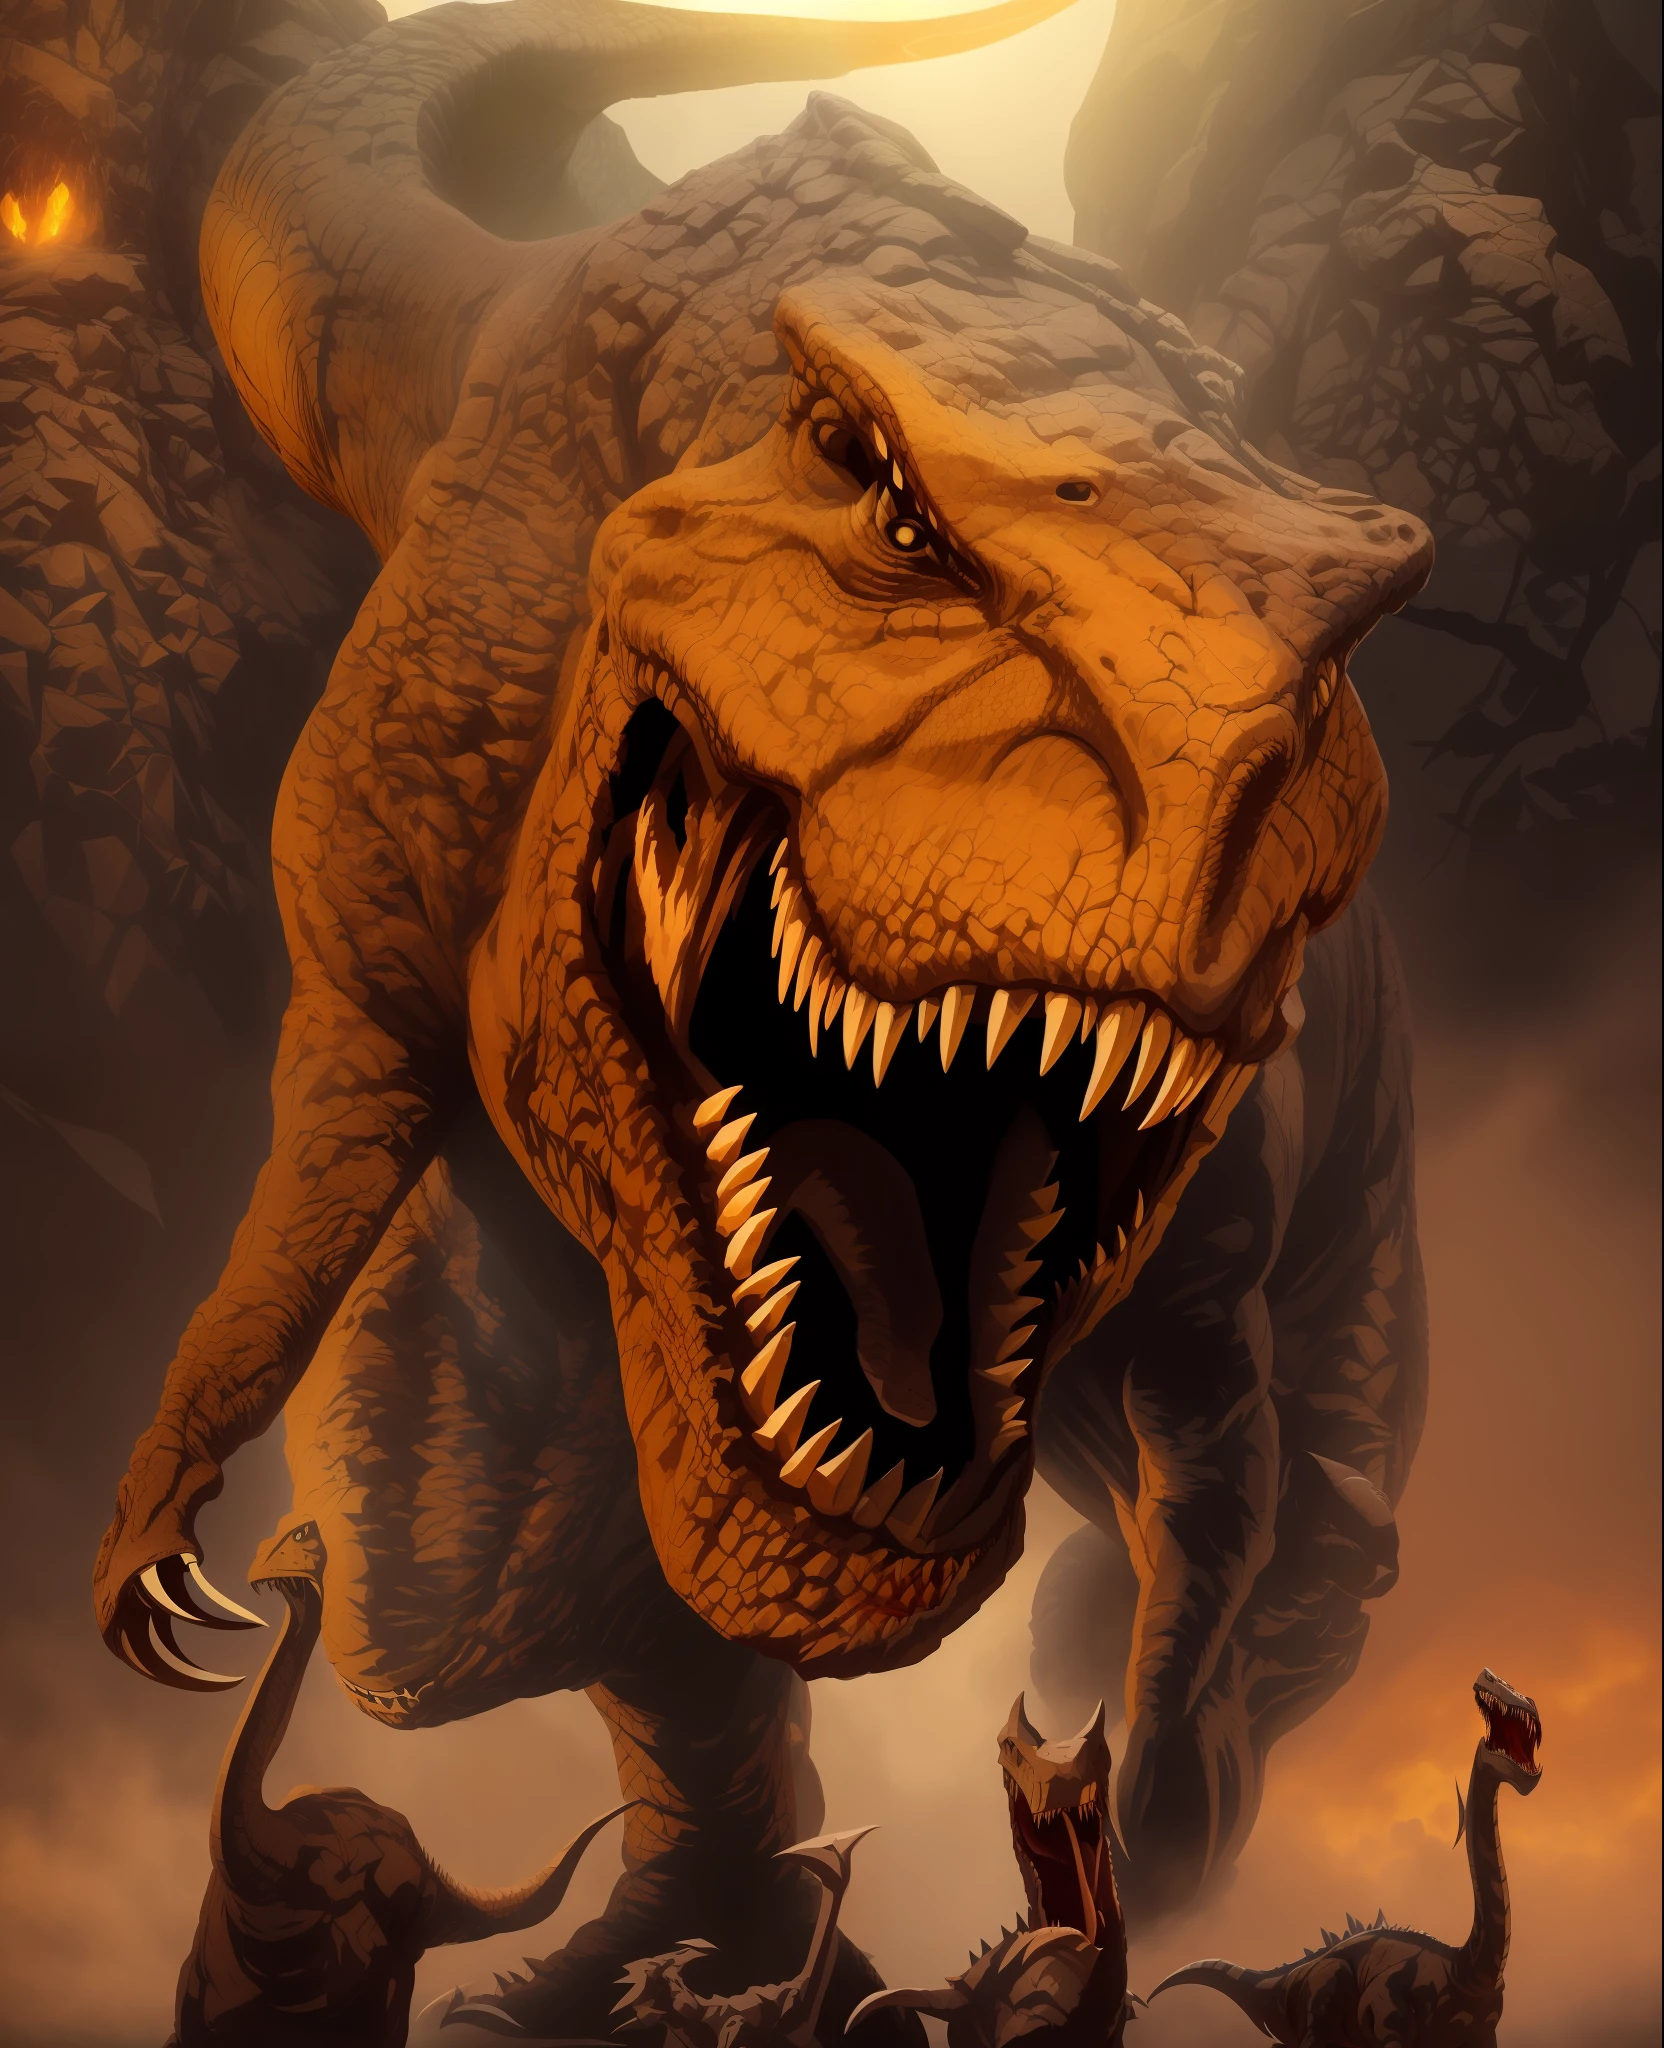 "Draw a Tyrannosaurus Rex (T-Rex) realistic with open mouth, showing his sharp teeth and tongue. The T-Rex&#39;s skin should be a dark shade and textured, with realistic shadows and details. The scene should be illuminated in a cinematic way, with a soft amber light coming from above and to the left of the image, casting subtle shadows and highlighting the contours of the T-Rex. The image should convey a sense of presence and power, with the T-Rex about to attack."